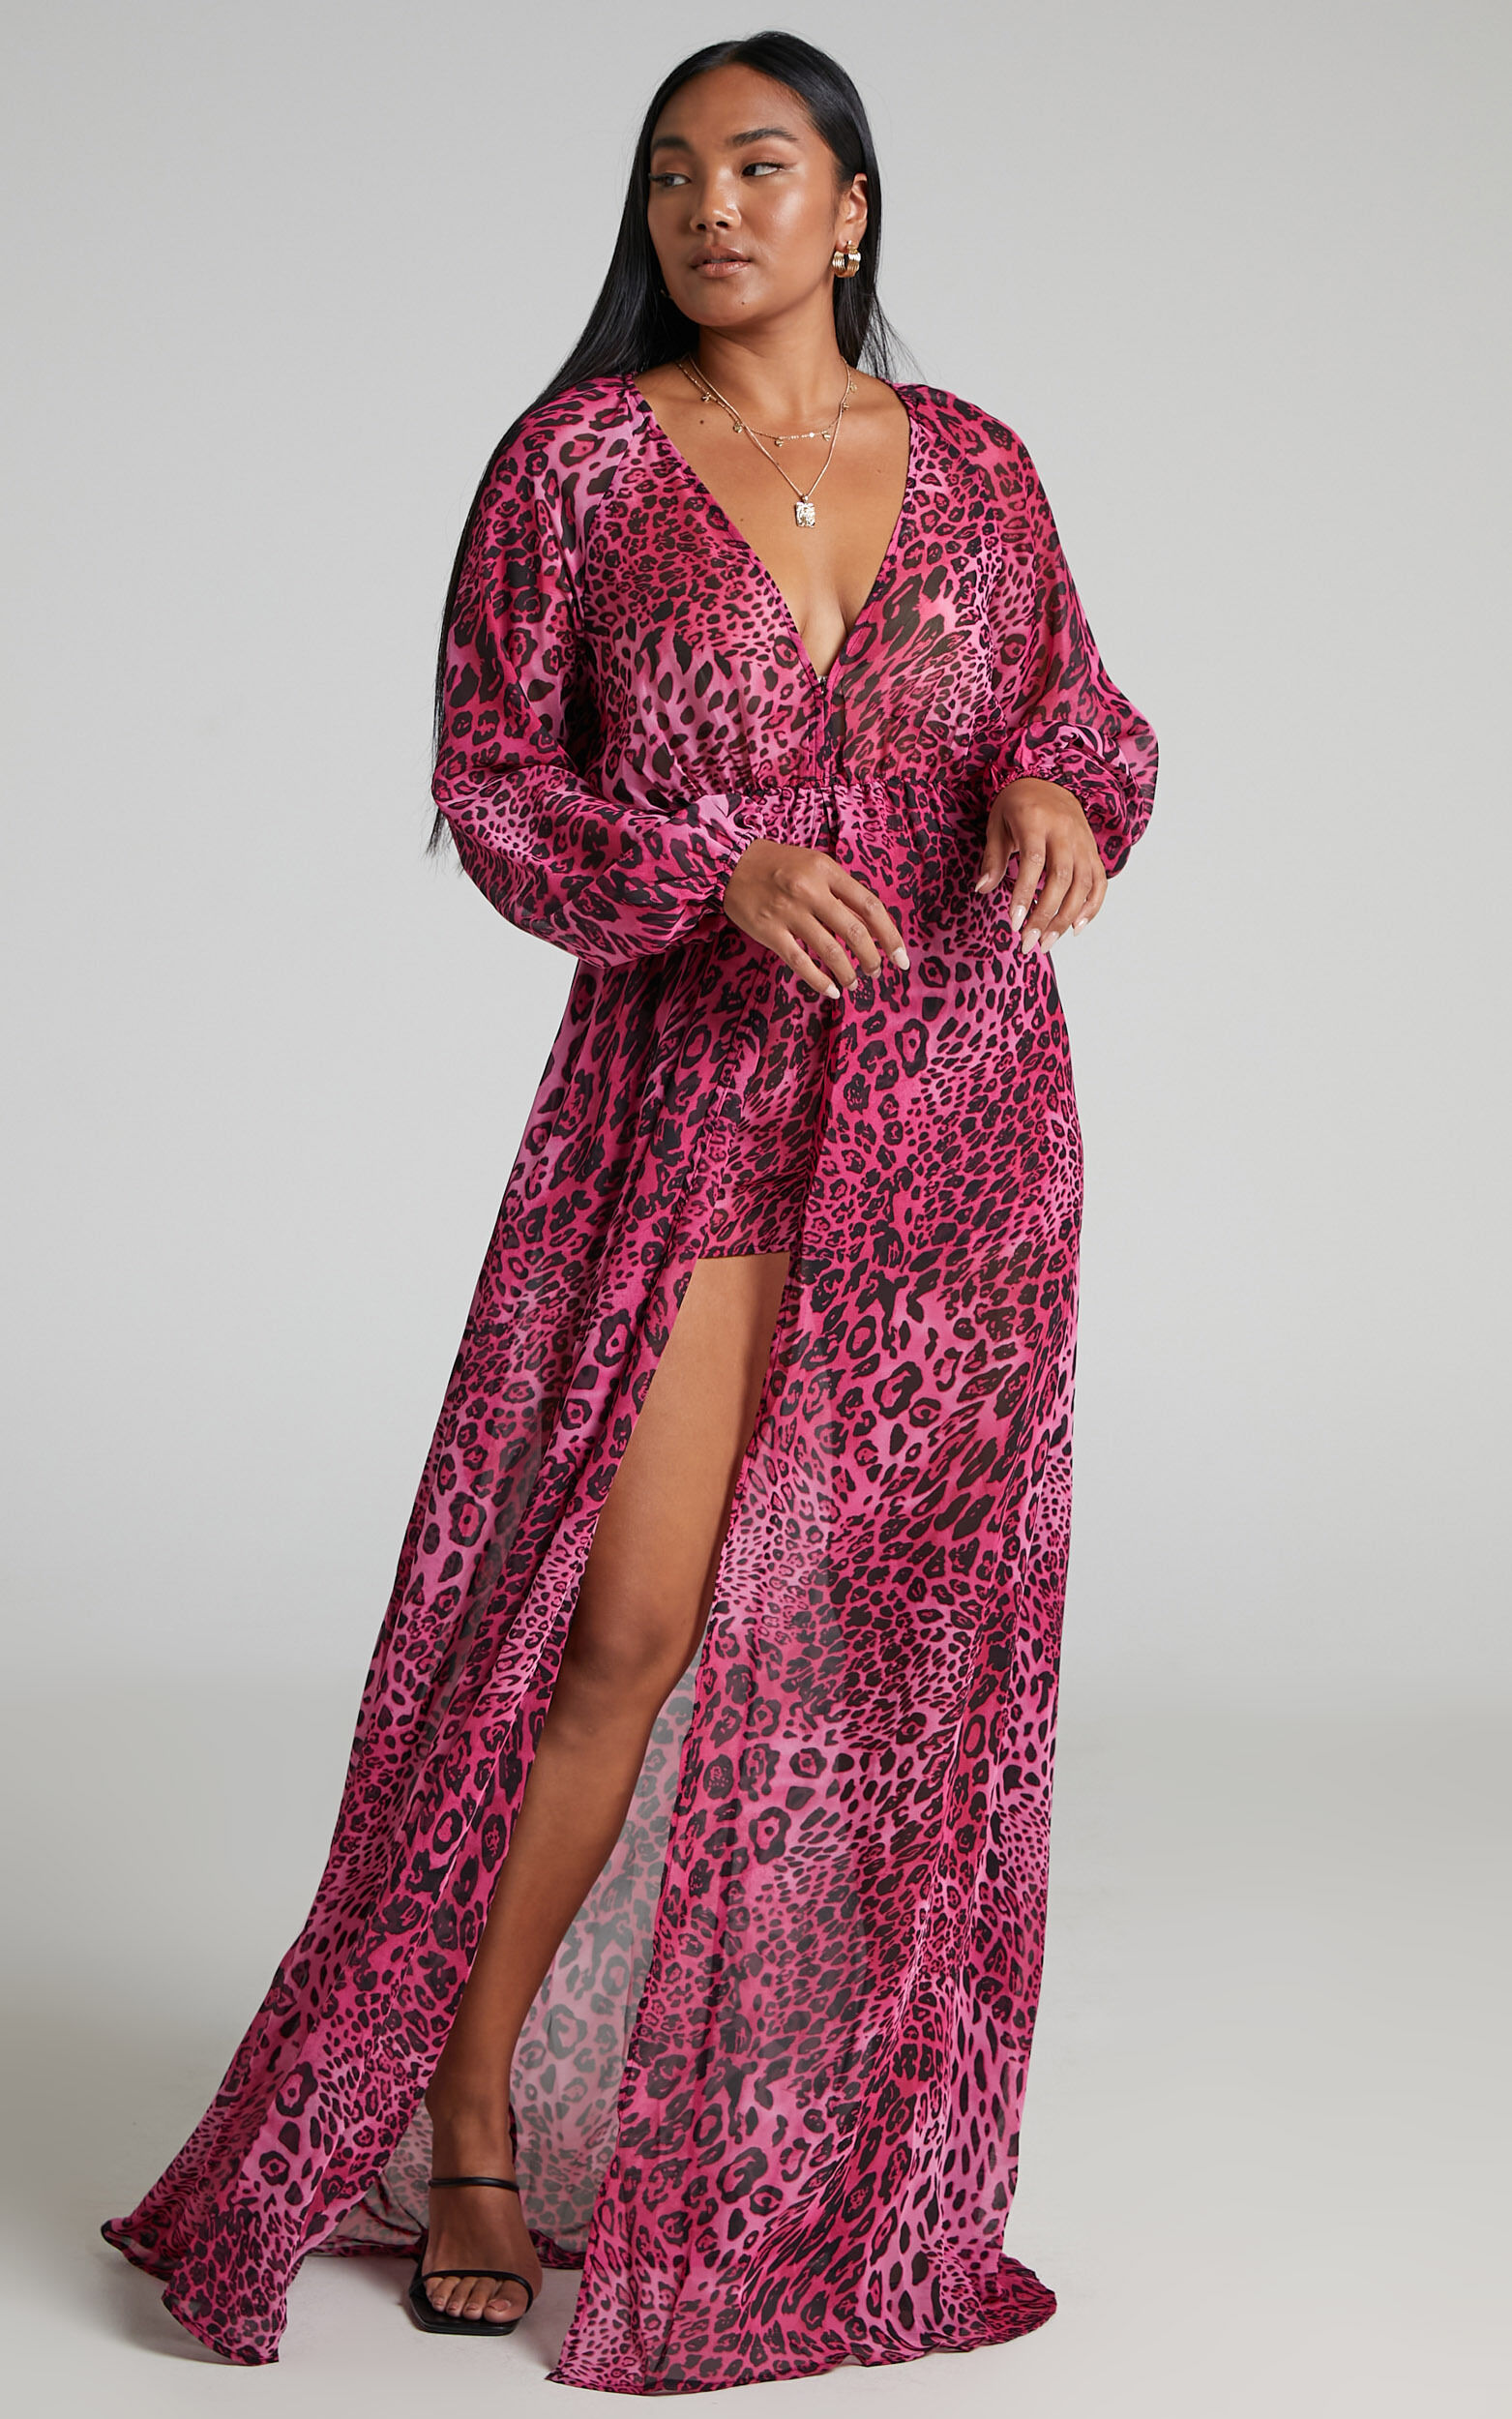 Aziza Playsuit - Plunge Neck Maxi Skirt Playsuit in Pink Leopard - 04, MLT1